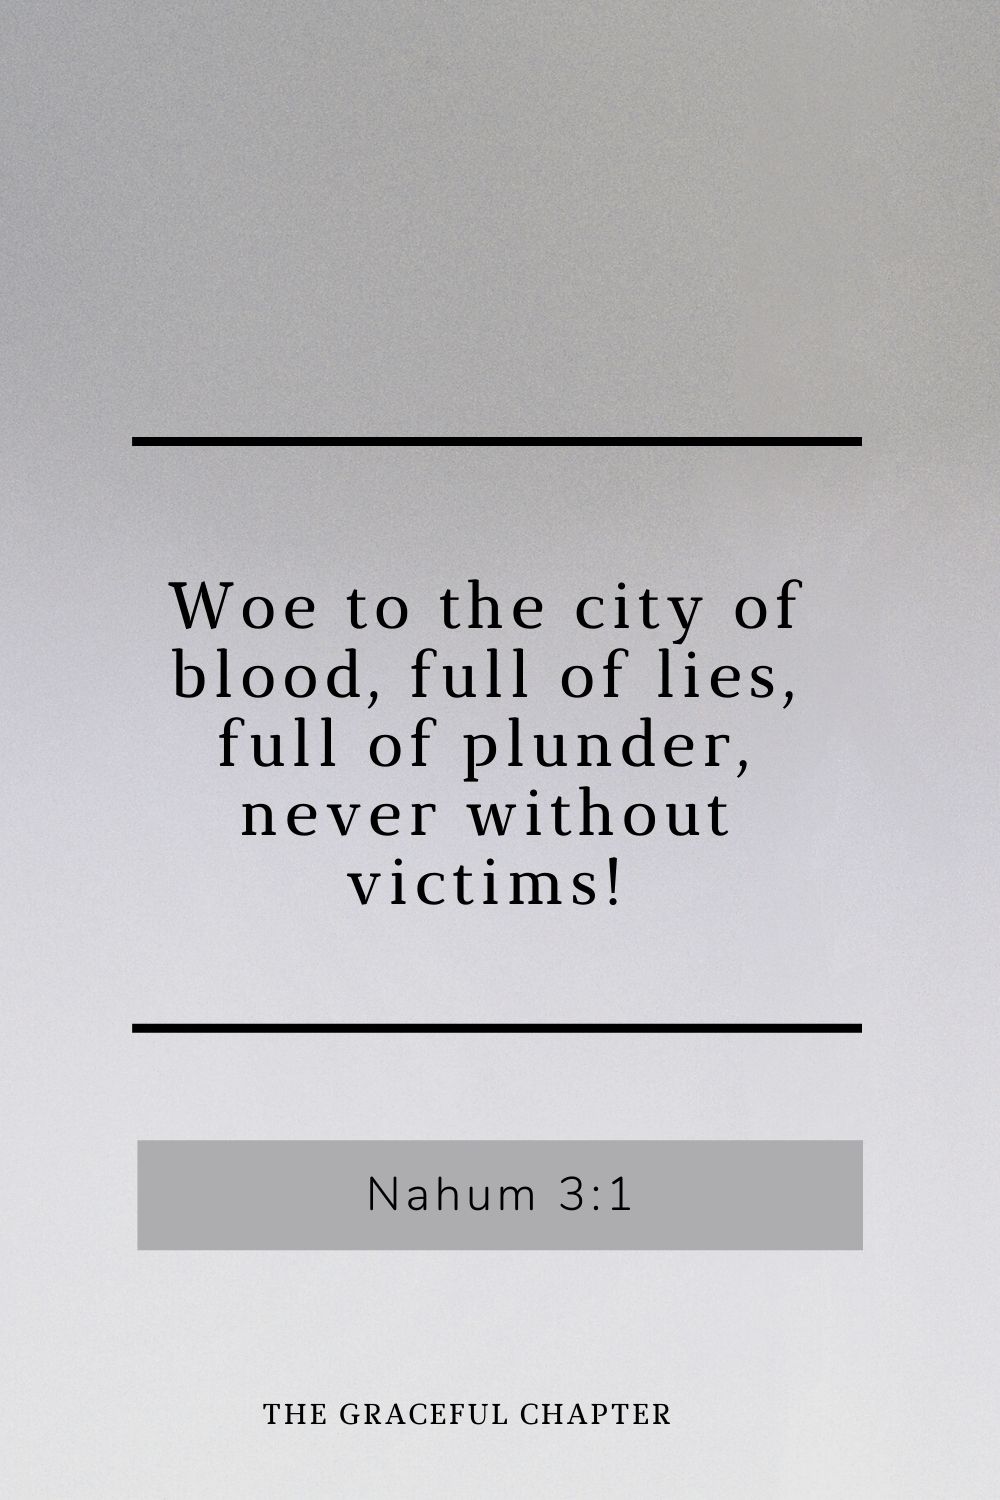 Woe to the city of blood, full of lies, full of plunder, never without victims! Nahum 3:1